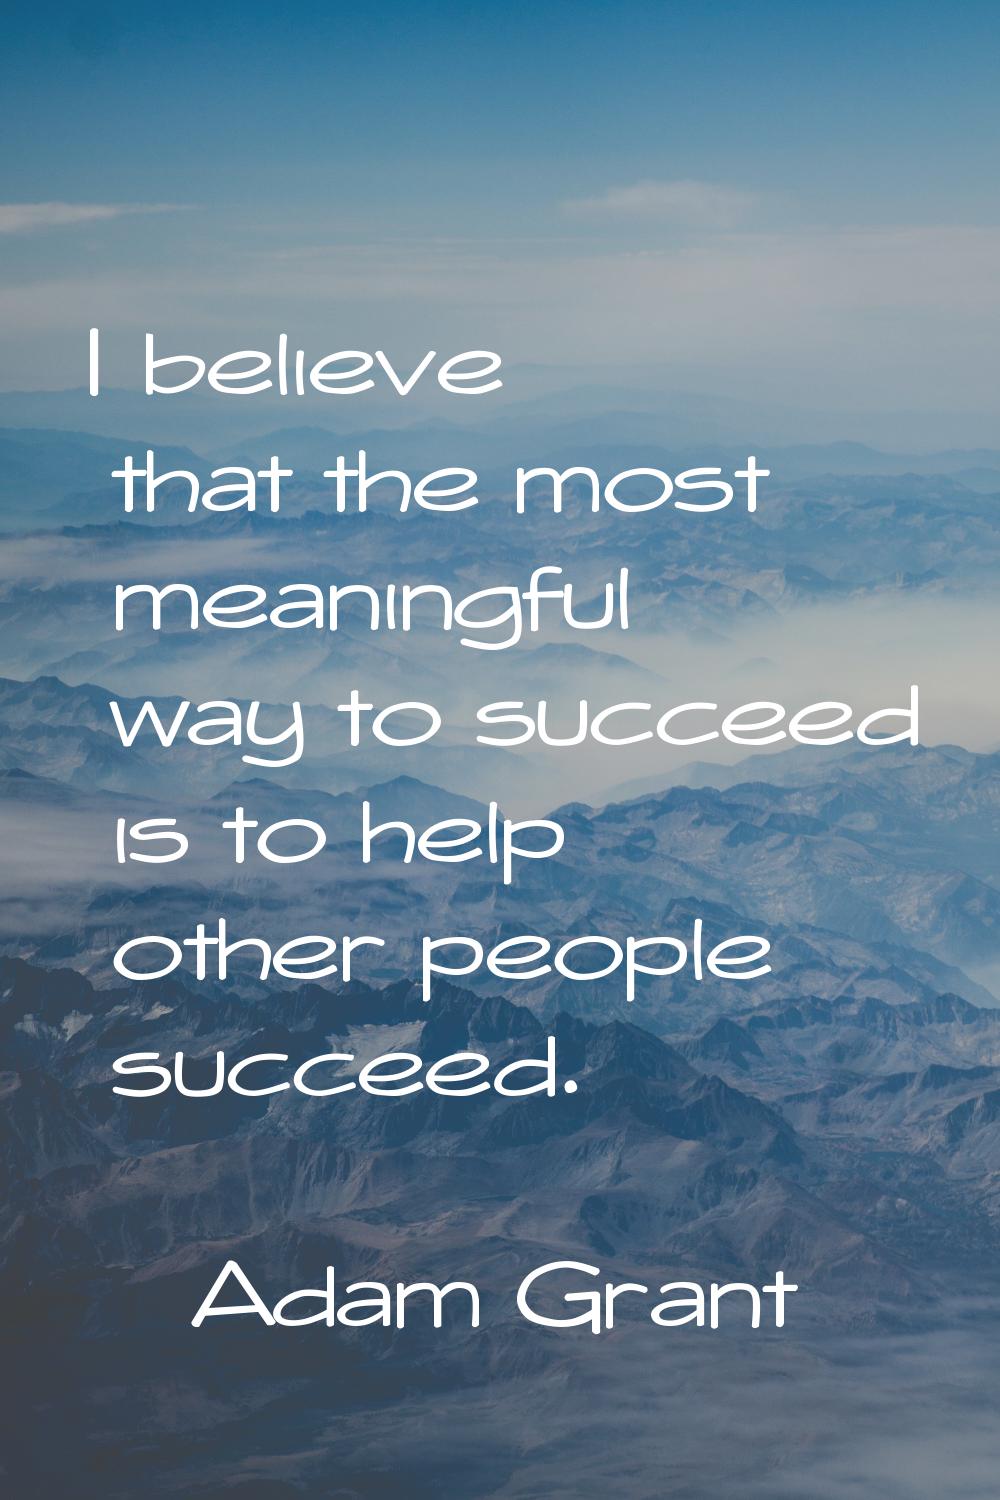 I believe that the most meaningful way to succeed is to help other people succeed.